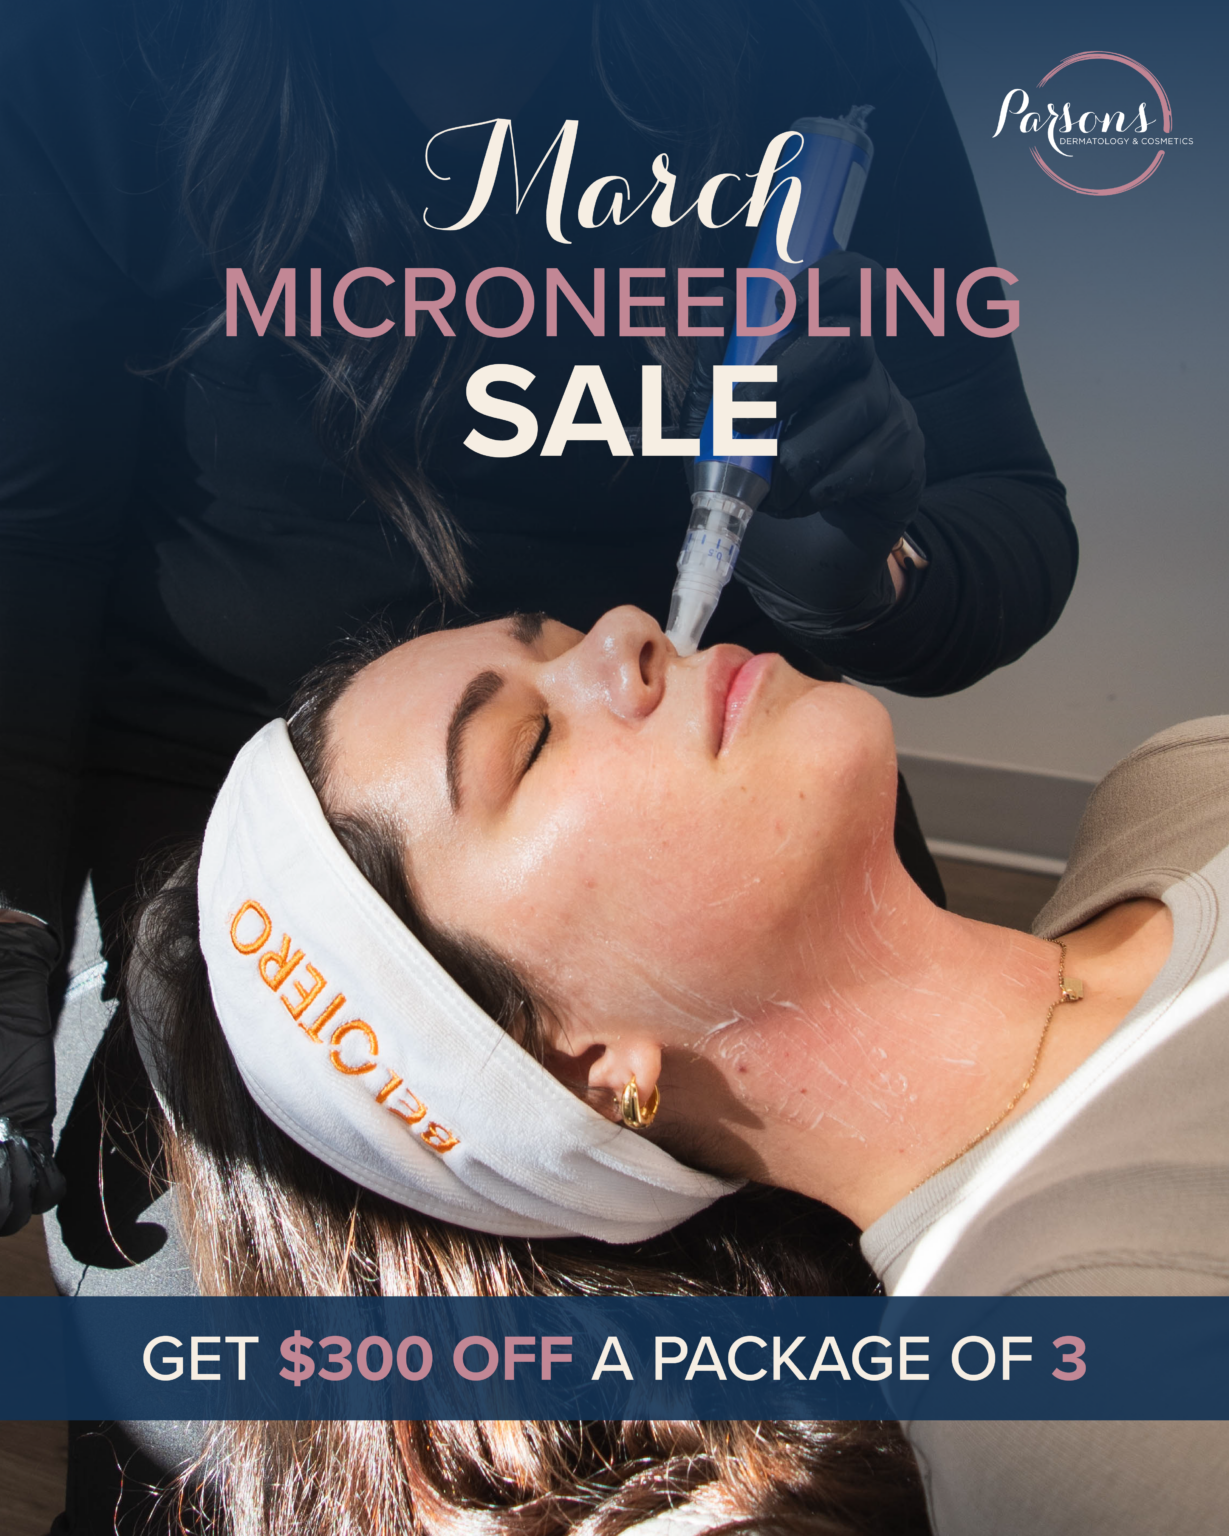 March Microneedling Sale